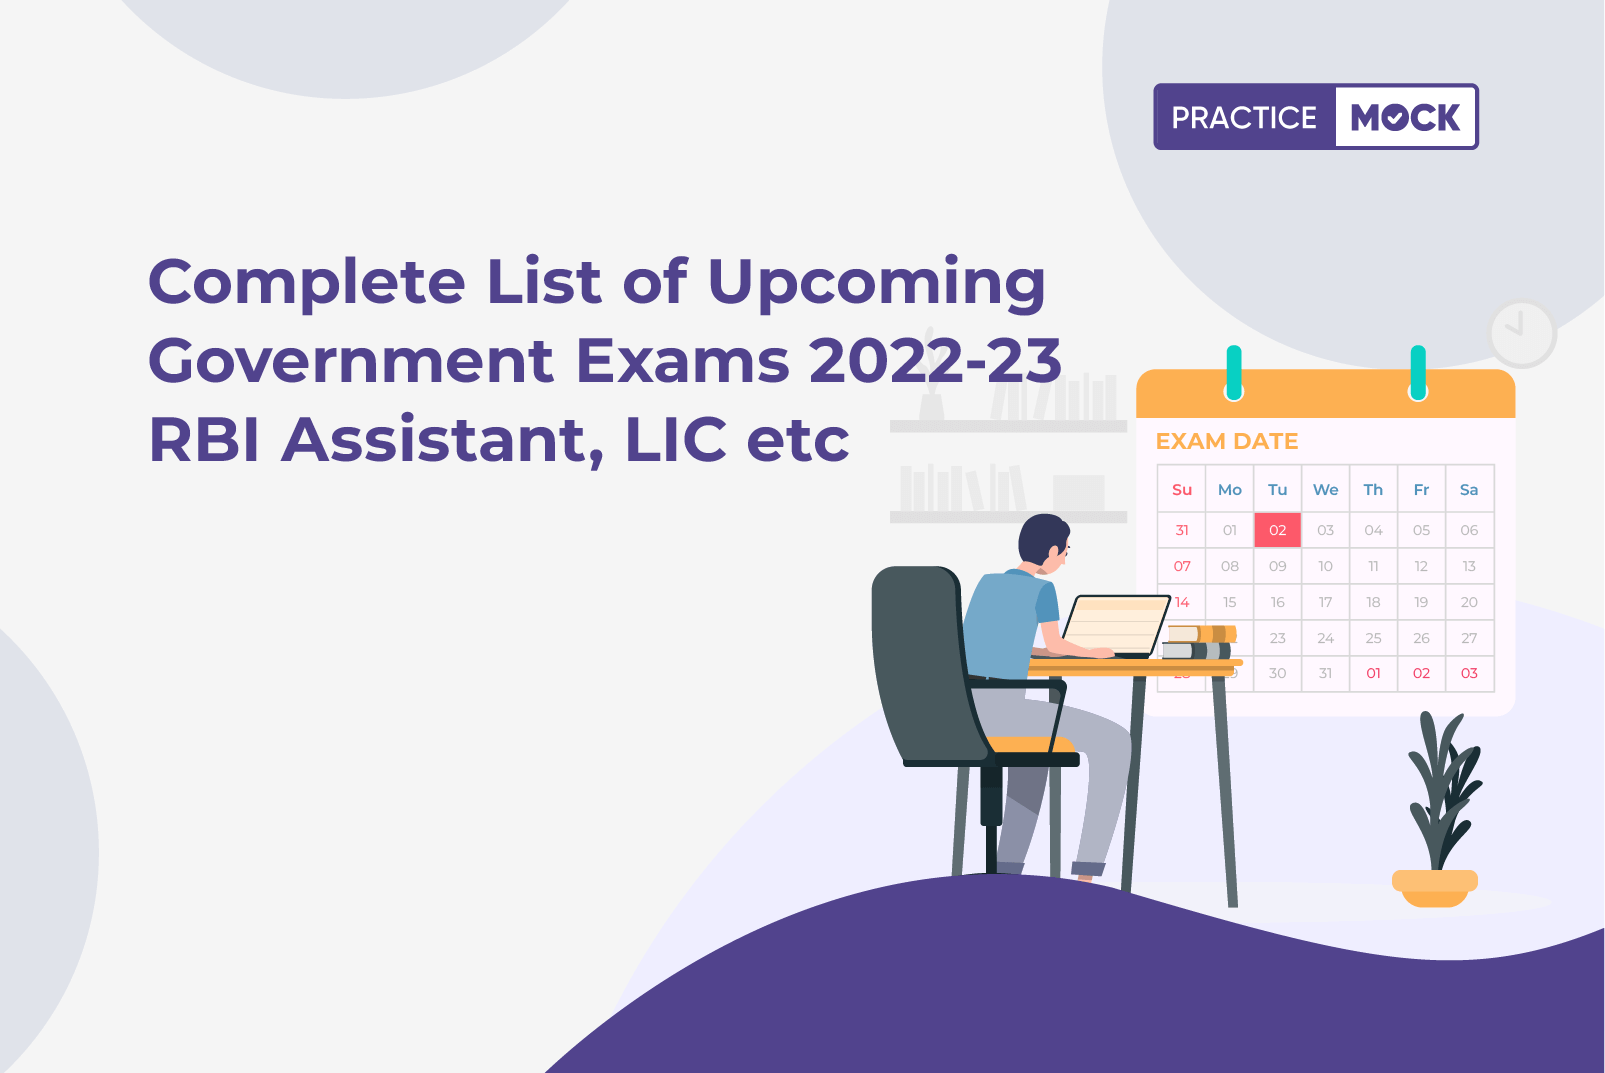 Complete List of Government exams 202223 RBI Assistant, LIC